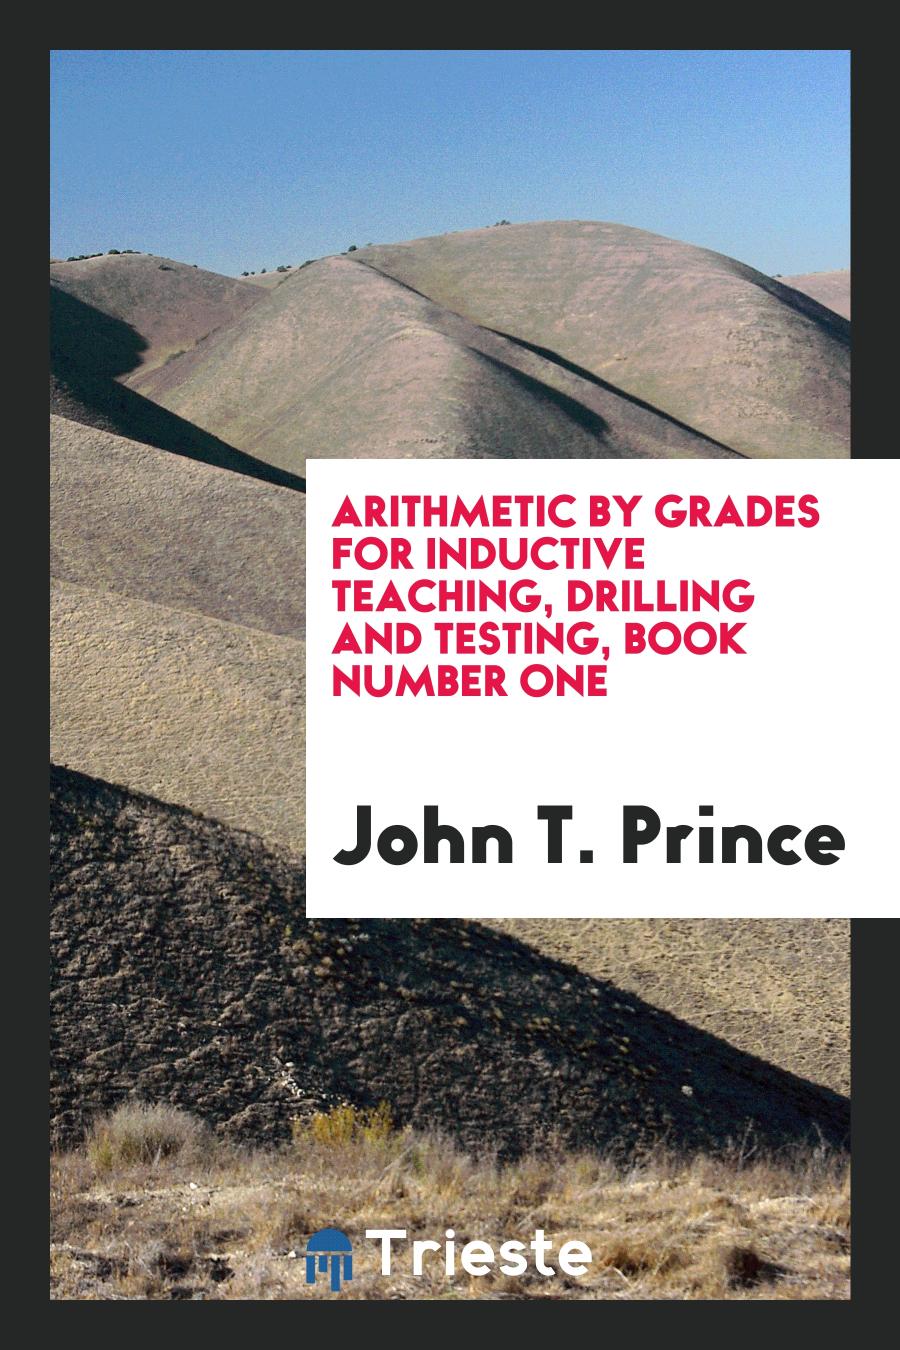 Arithmetic by Grades for Inductive Teaching, Drilling and Testing, Book Number One